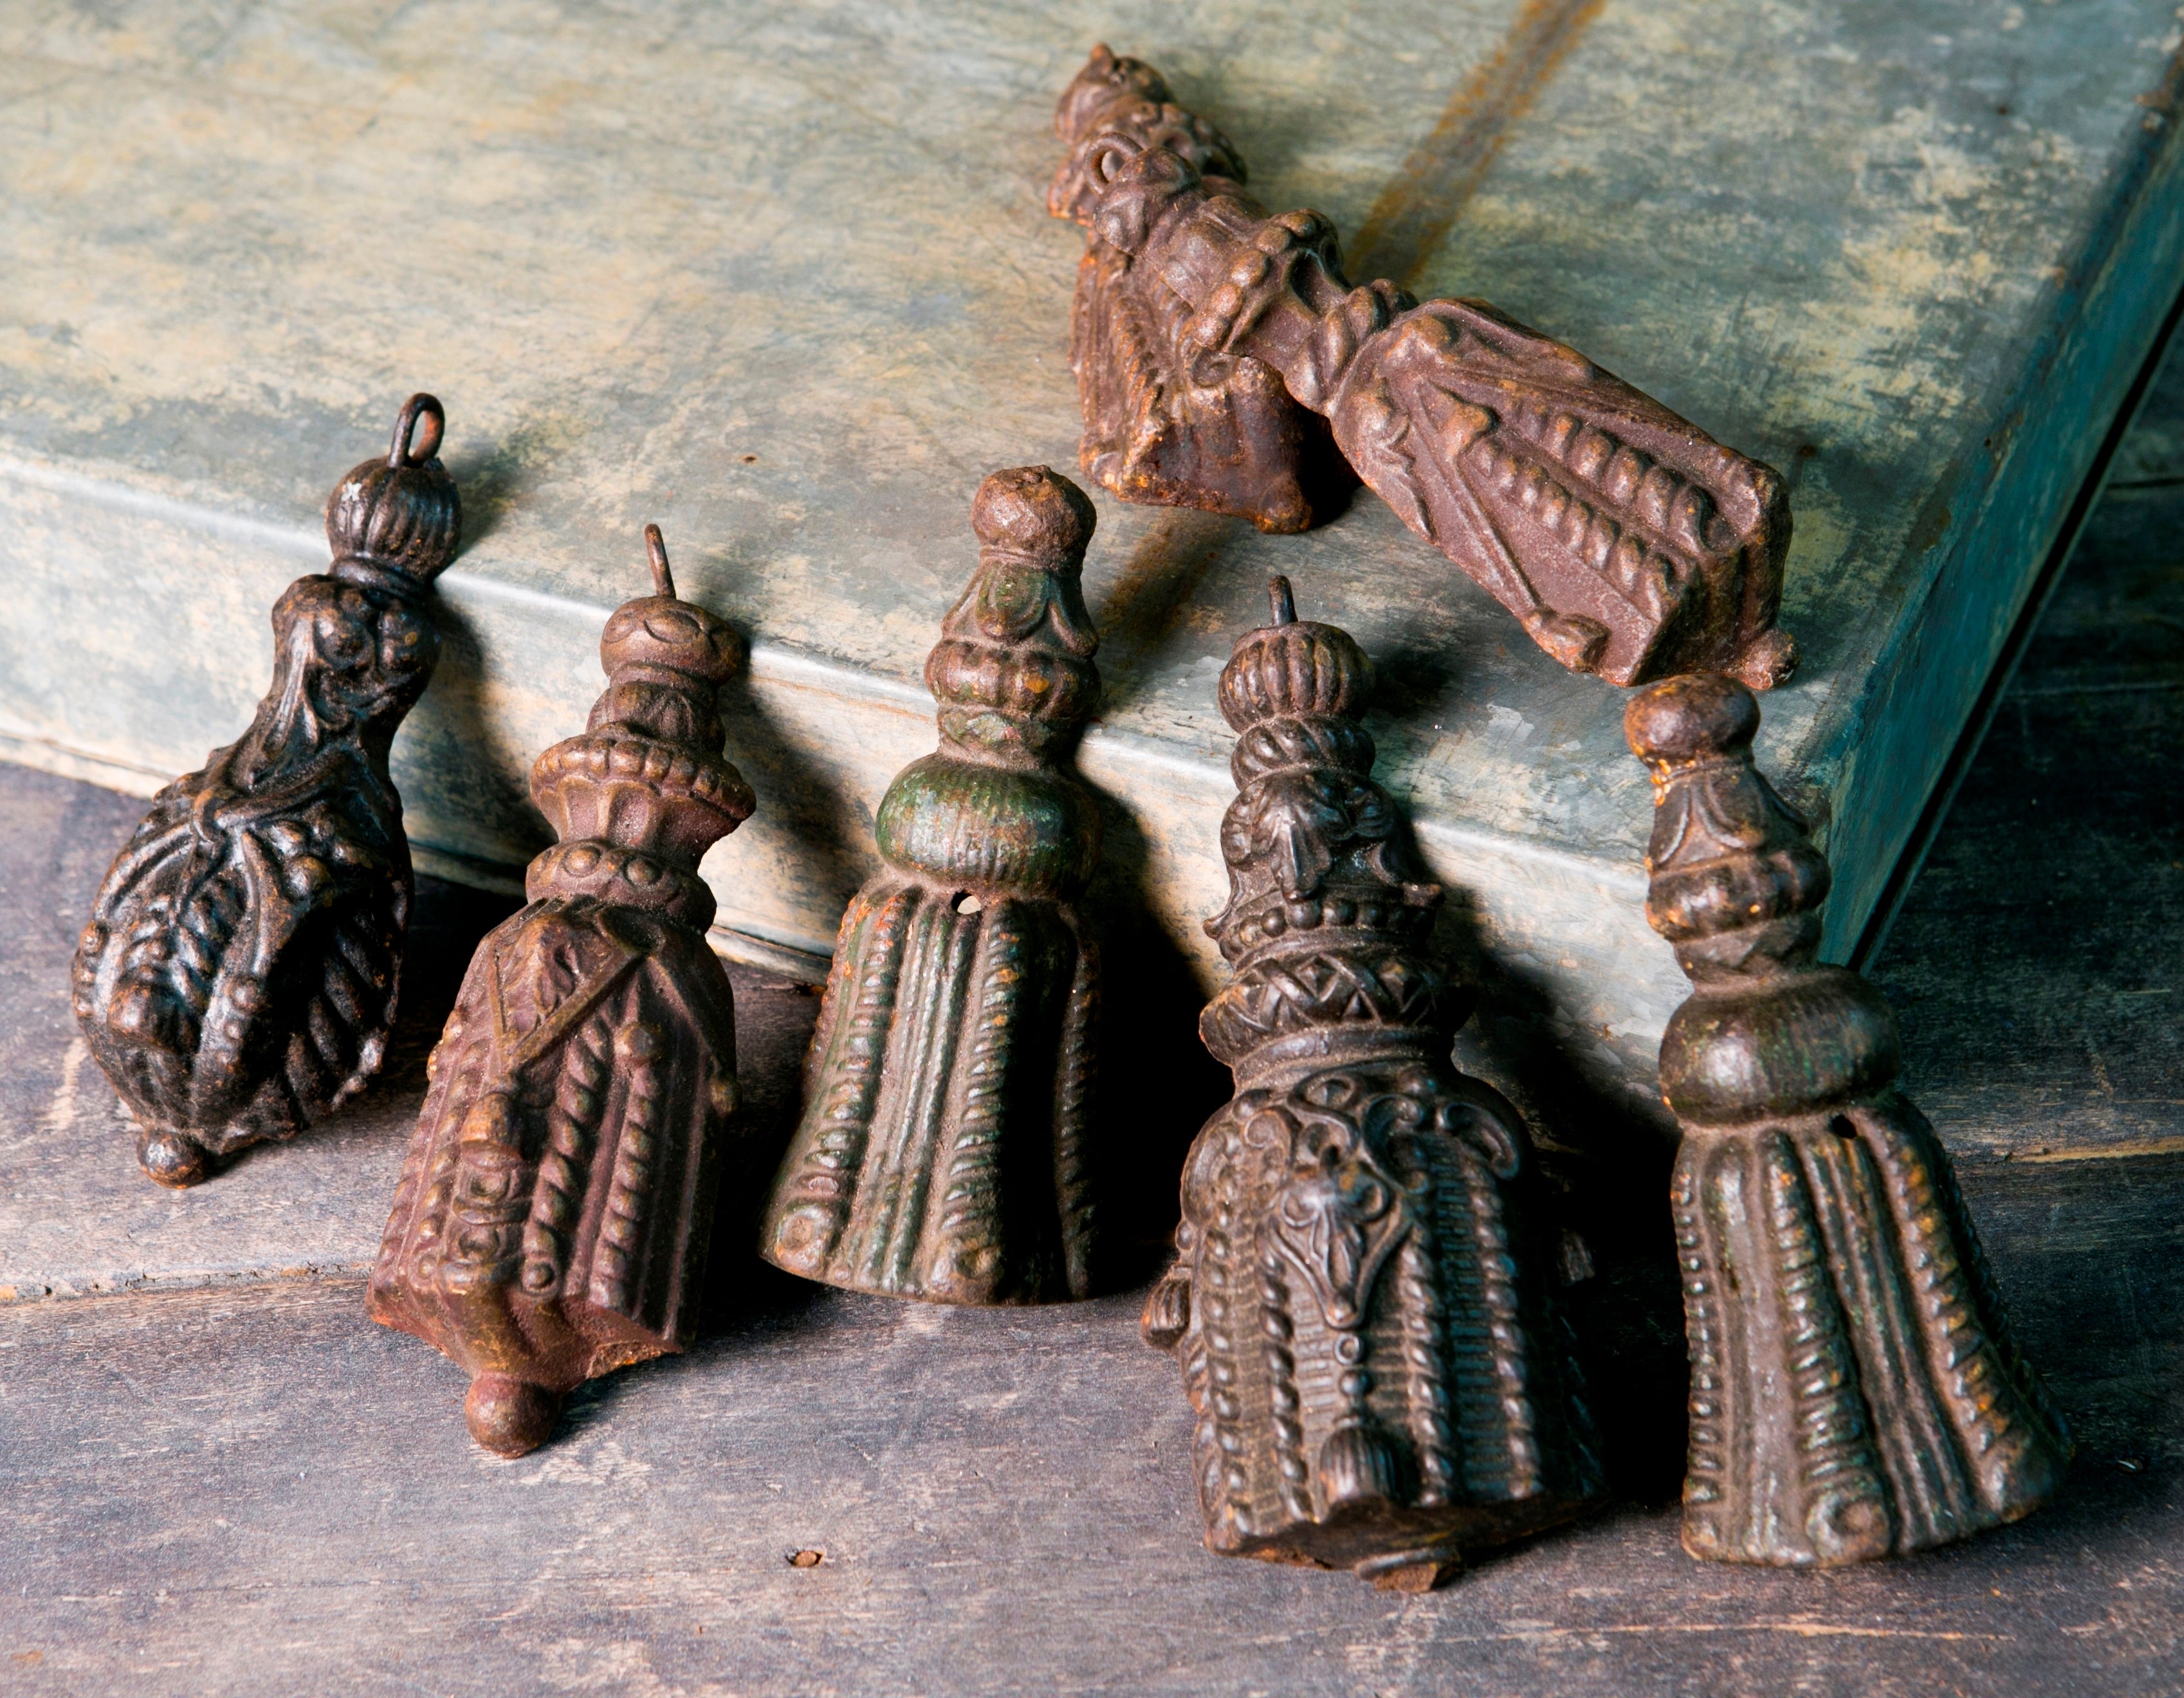 Various French Cast Iron Drapery Weights, circa 1890